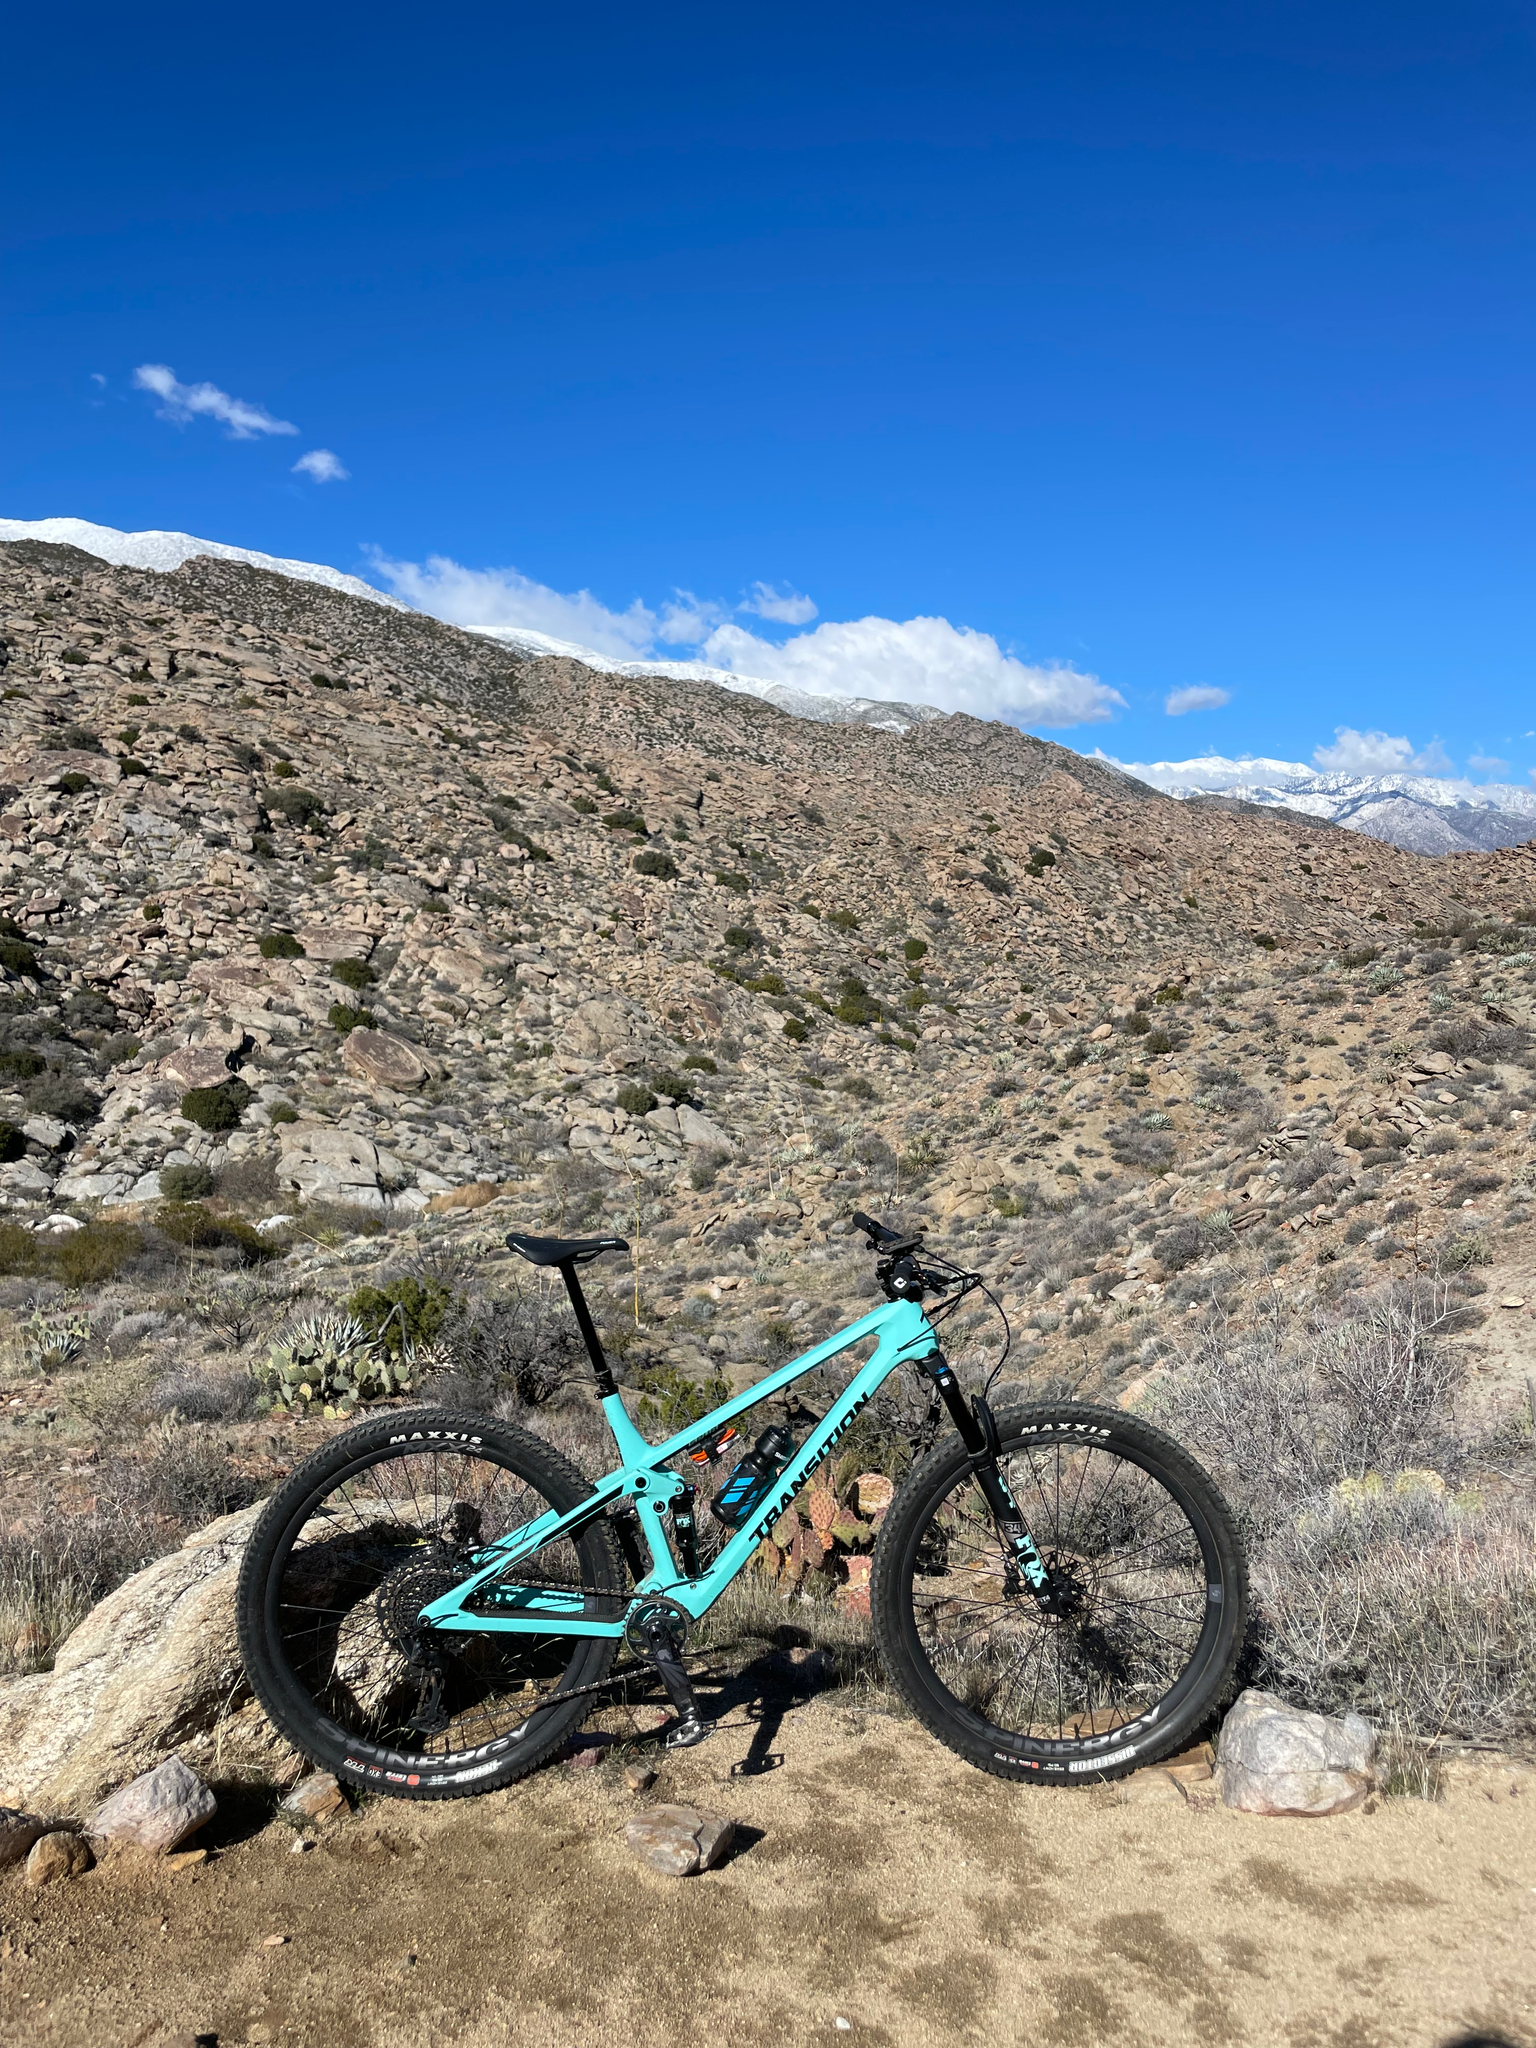 Ride Report: The Palm Canyon Epic